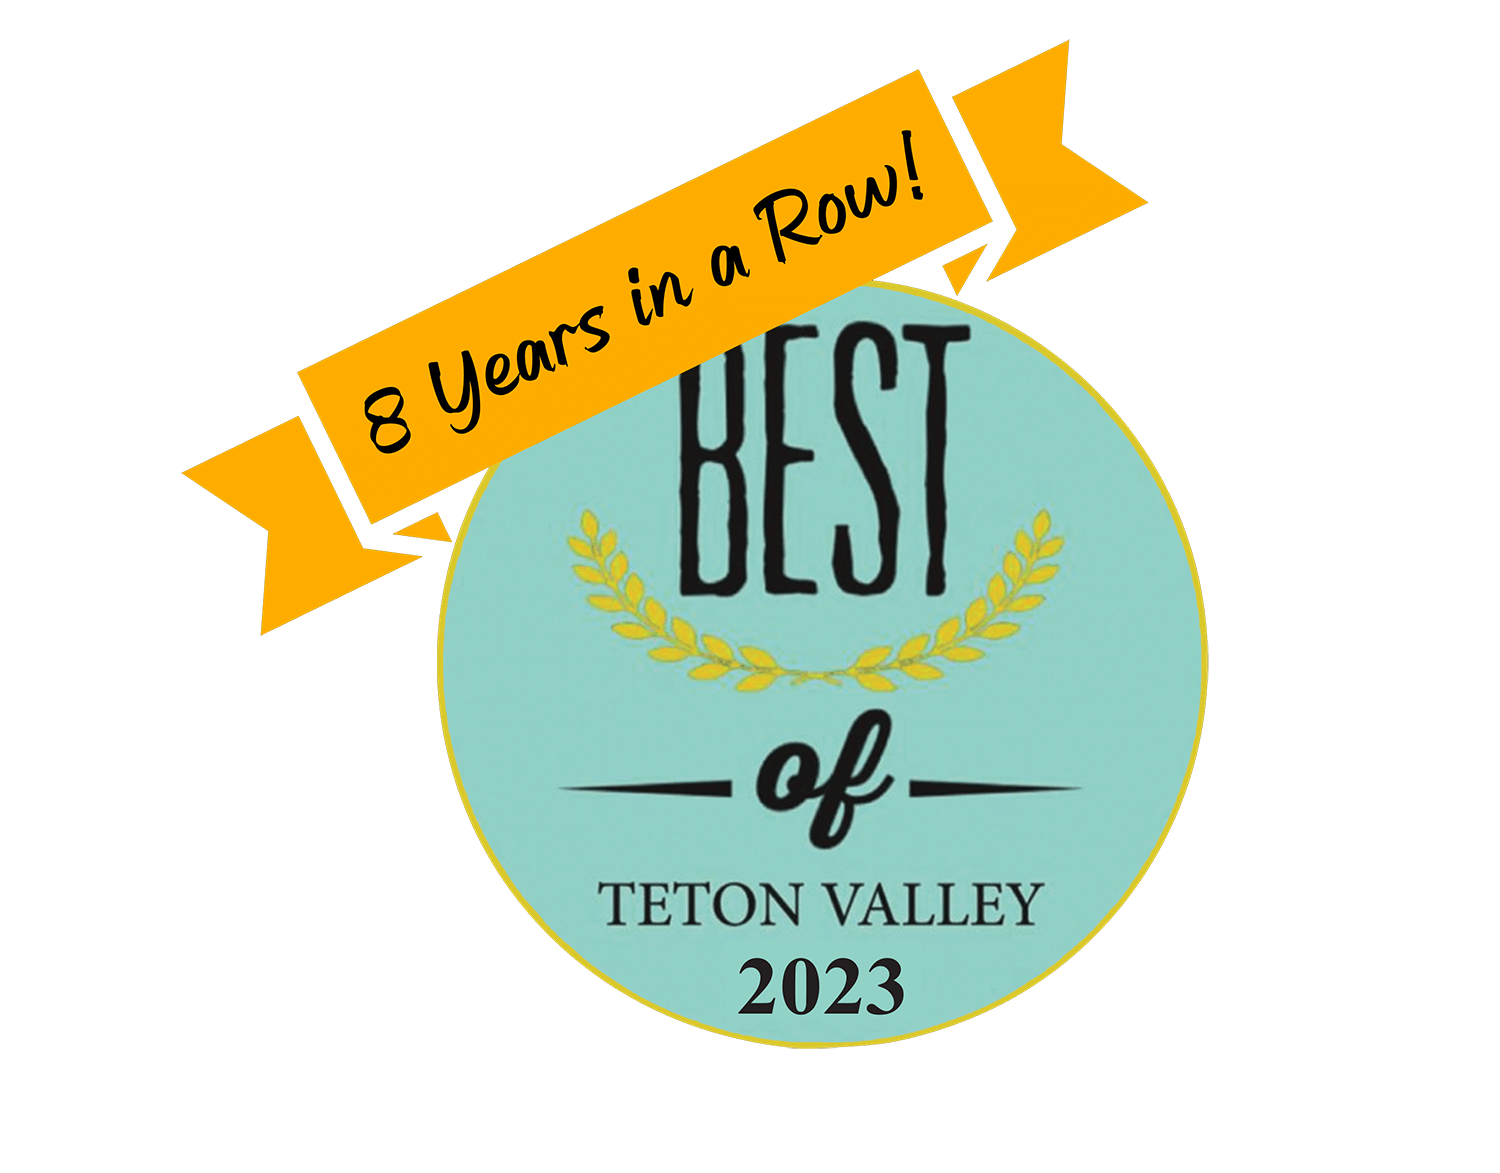 Best of Teton Valley 2023 Badge - 8 Years in a Row